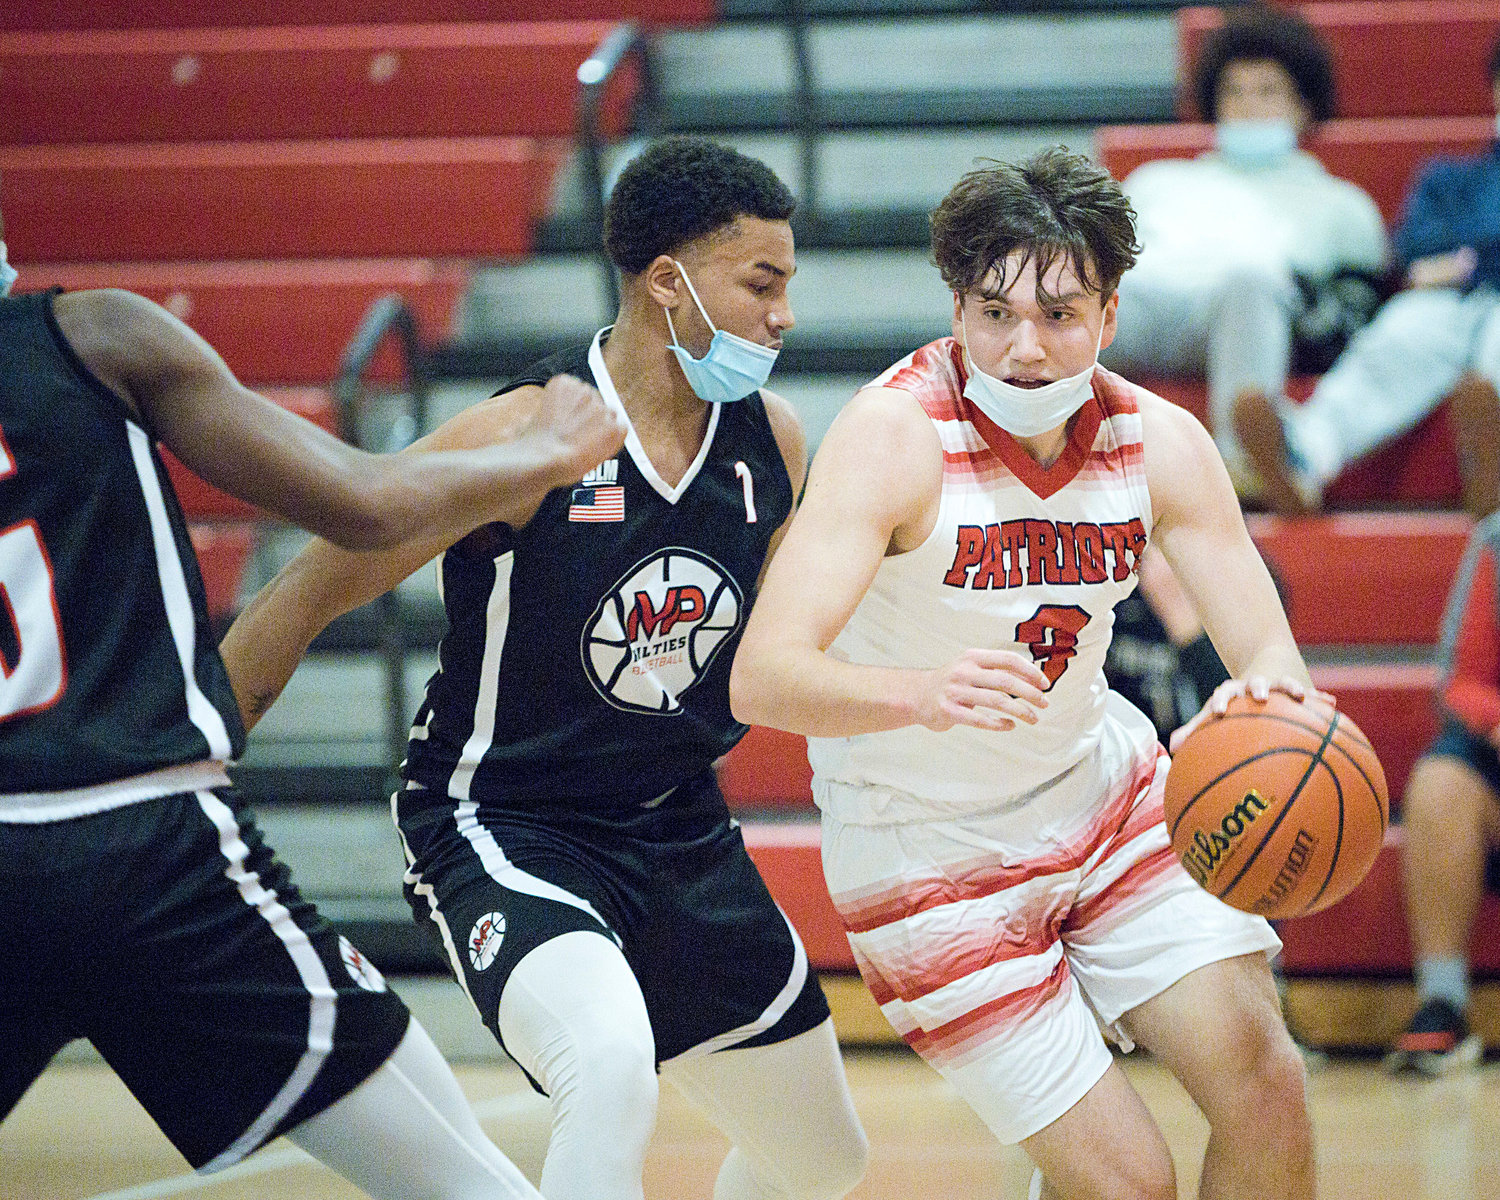 Jack Downing is pressured by a Mt. Pleasant opponent while controlling the ball toward the hoop.